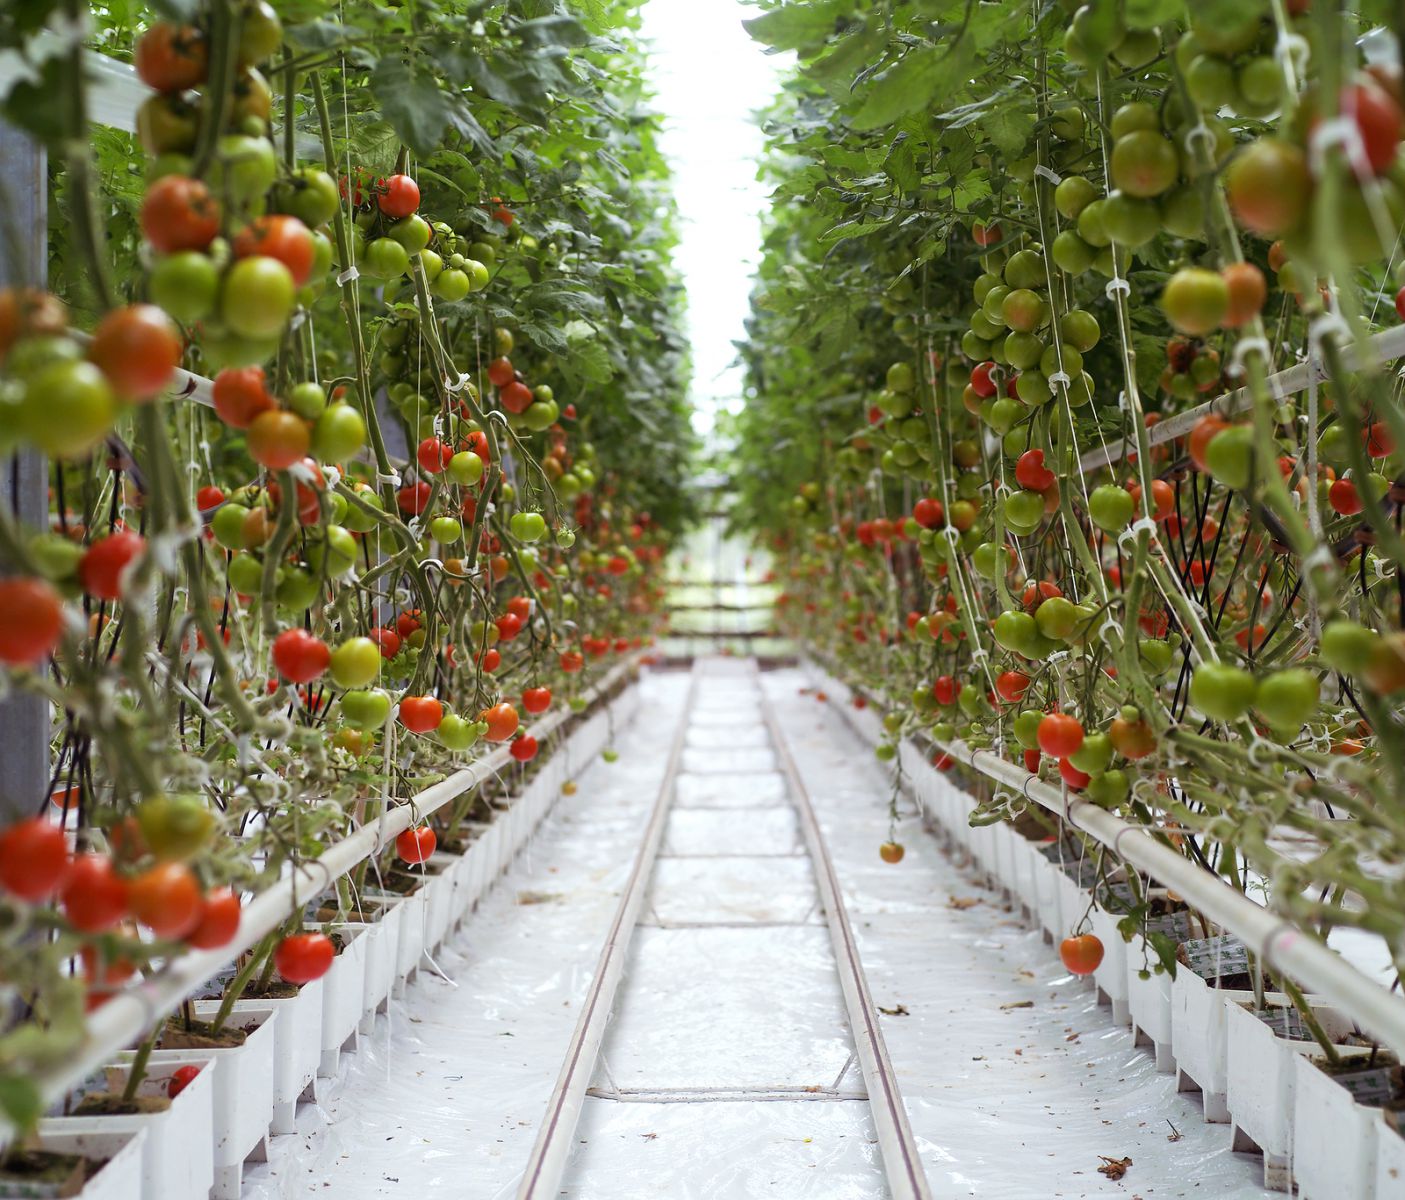 Soilless Cultivation of Tomatoes